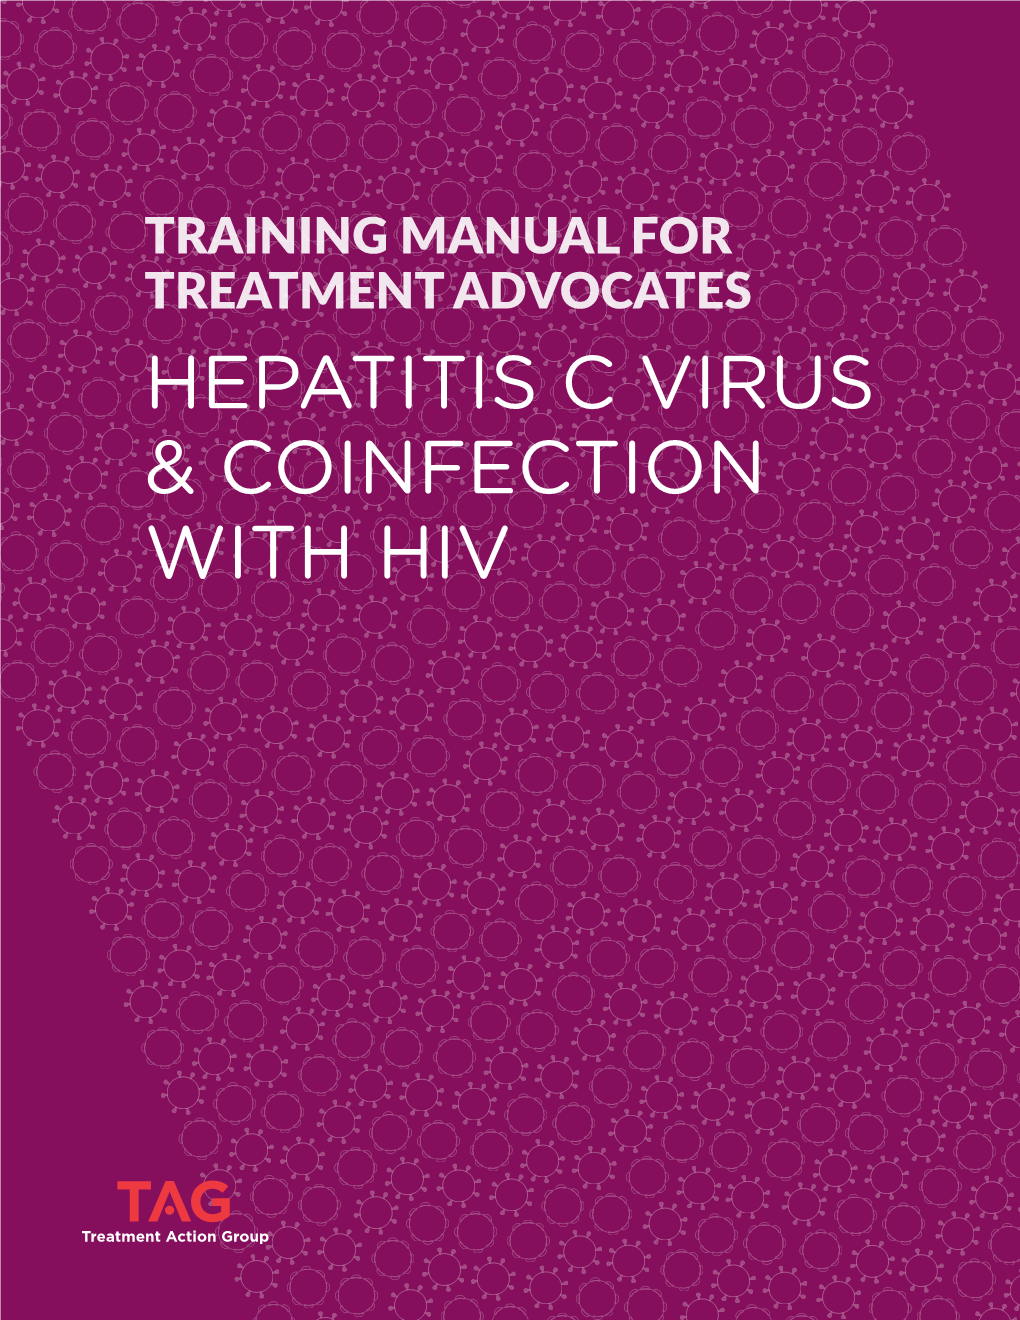 Hepatitis C Virus & Coinfection With